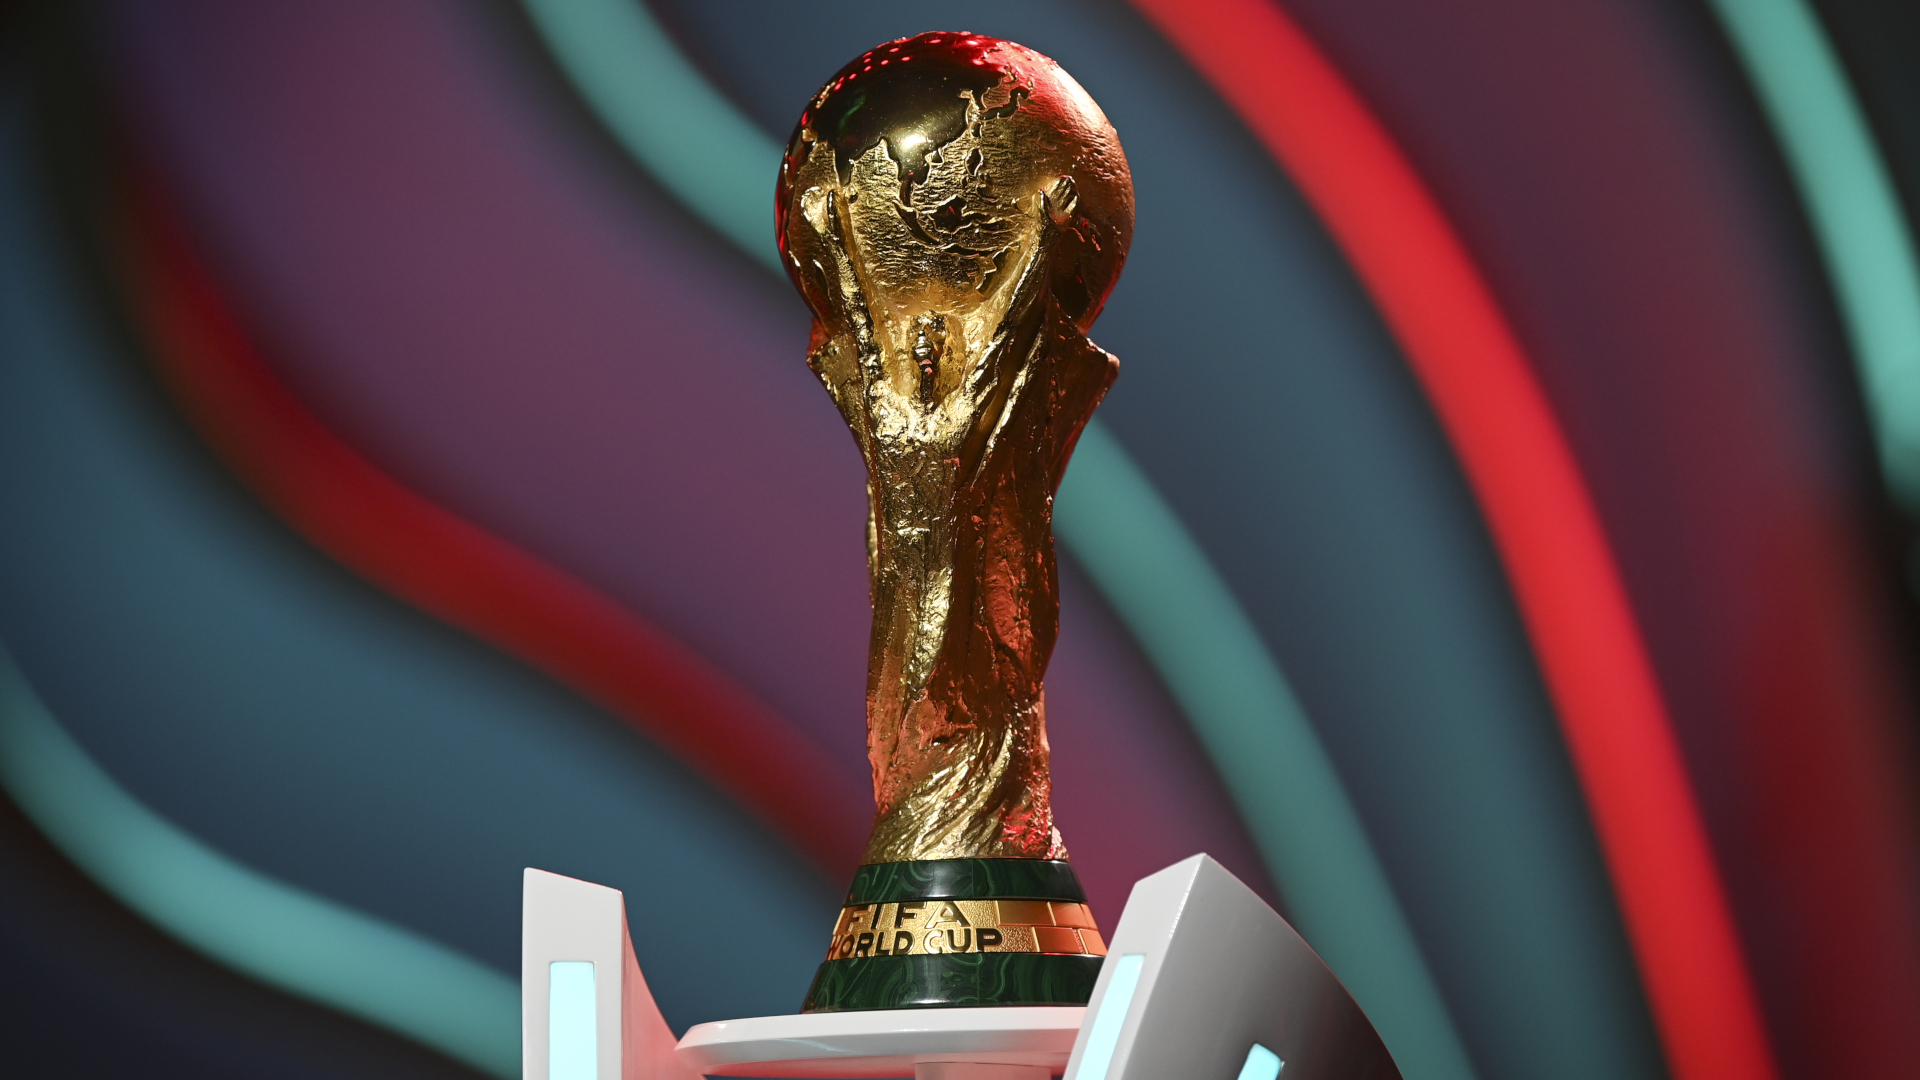 Fifa World Cup 2022 Opening Ceremony Live Stream Options to Watch Online